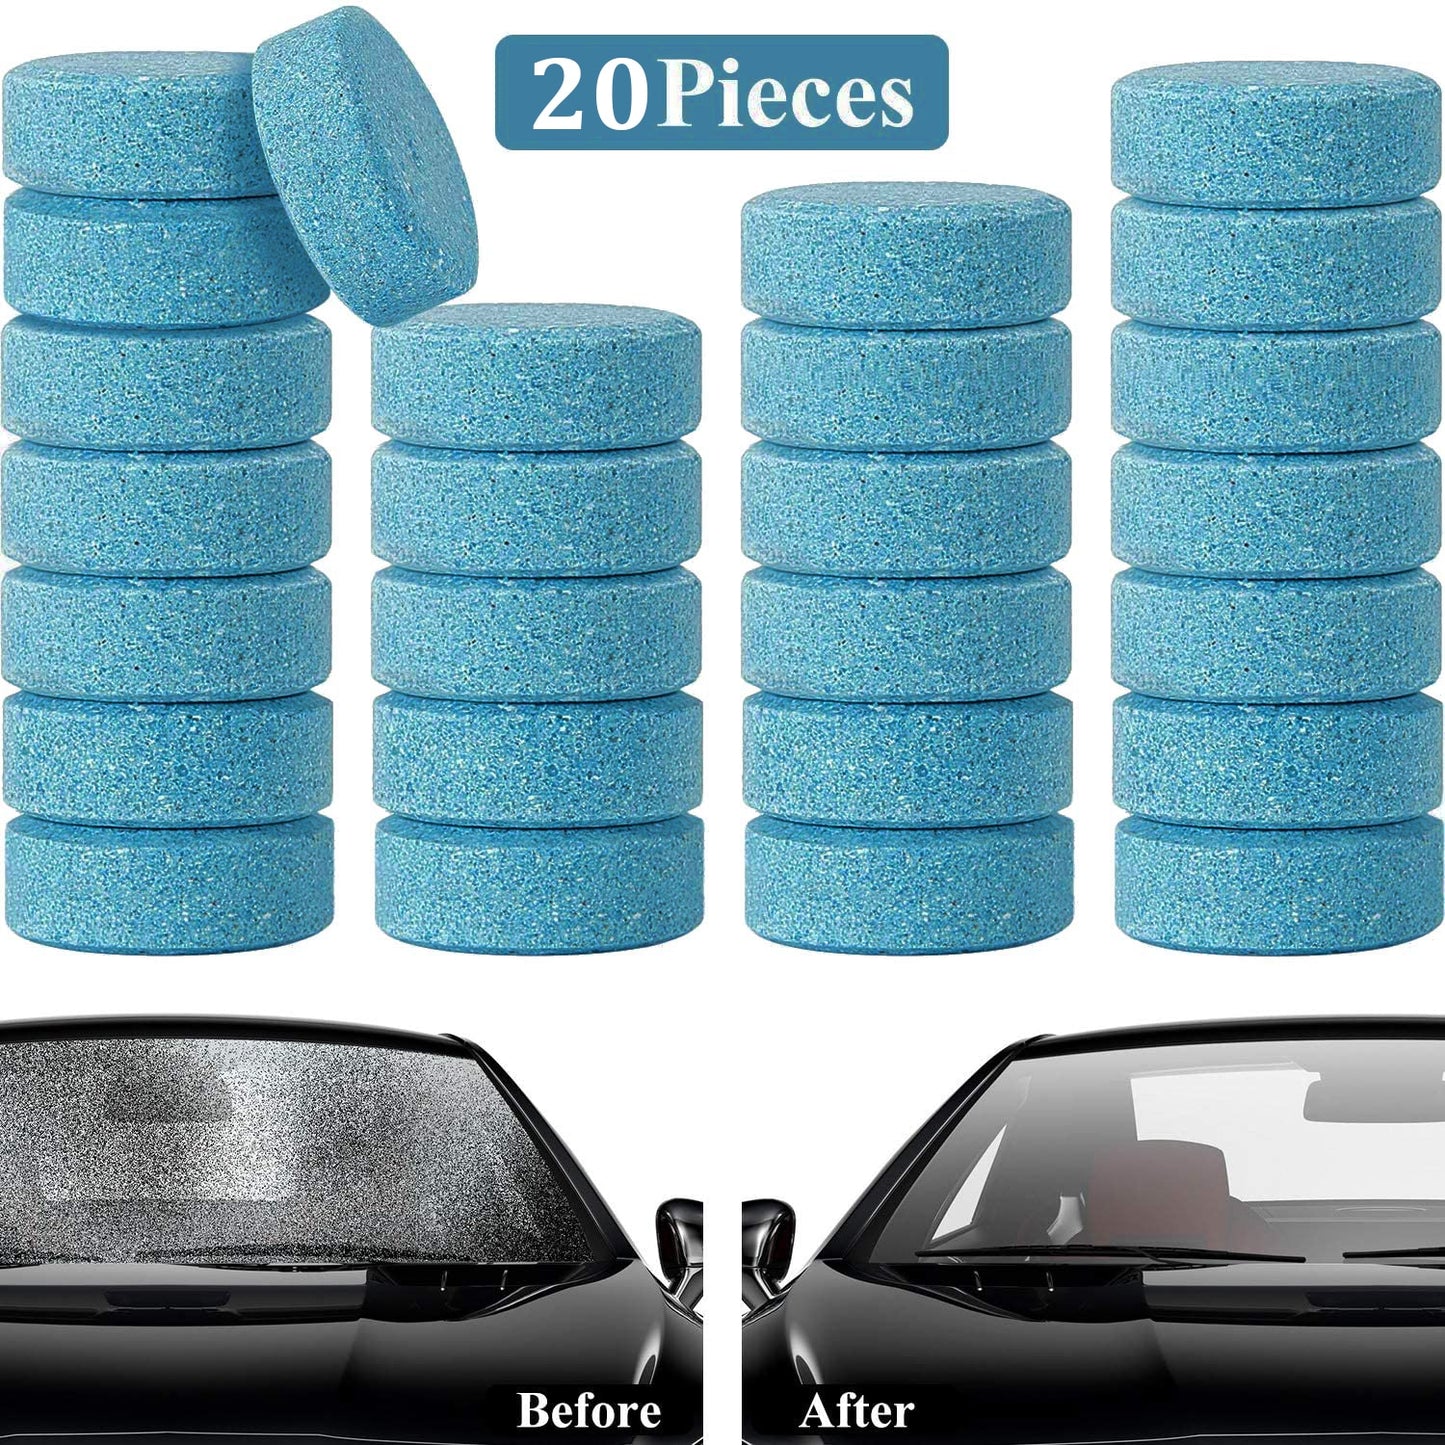 Car Windshield Cleaning Effervescent Tablets - Bargains4PenniesCar Windshield Cleaning Effervescent TabletsBargains4Pennies